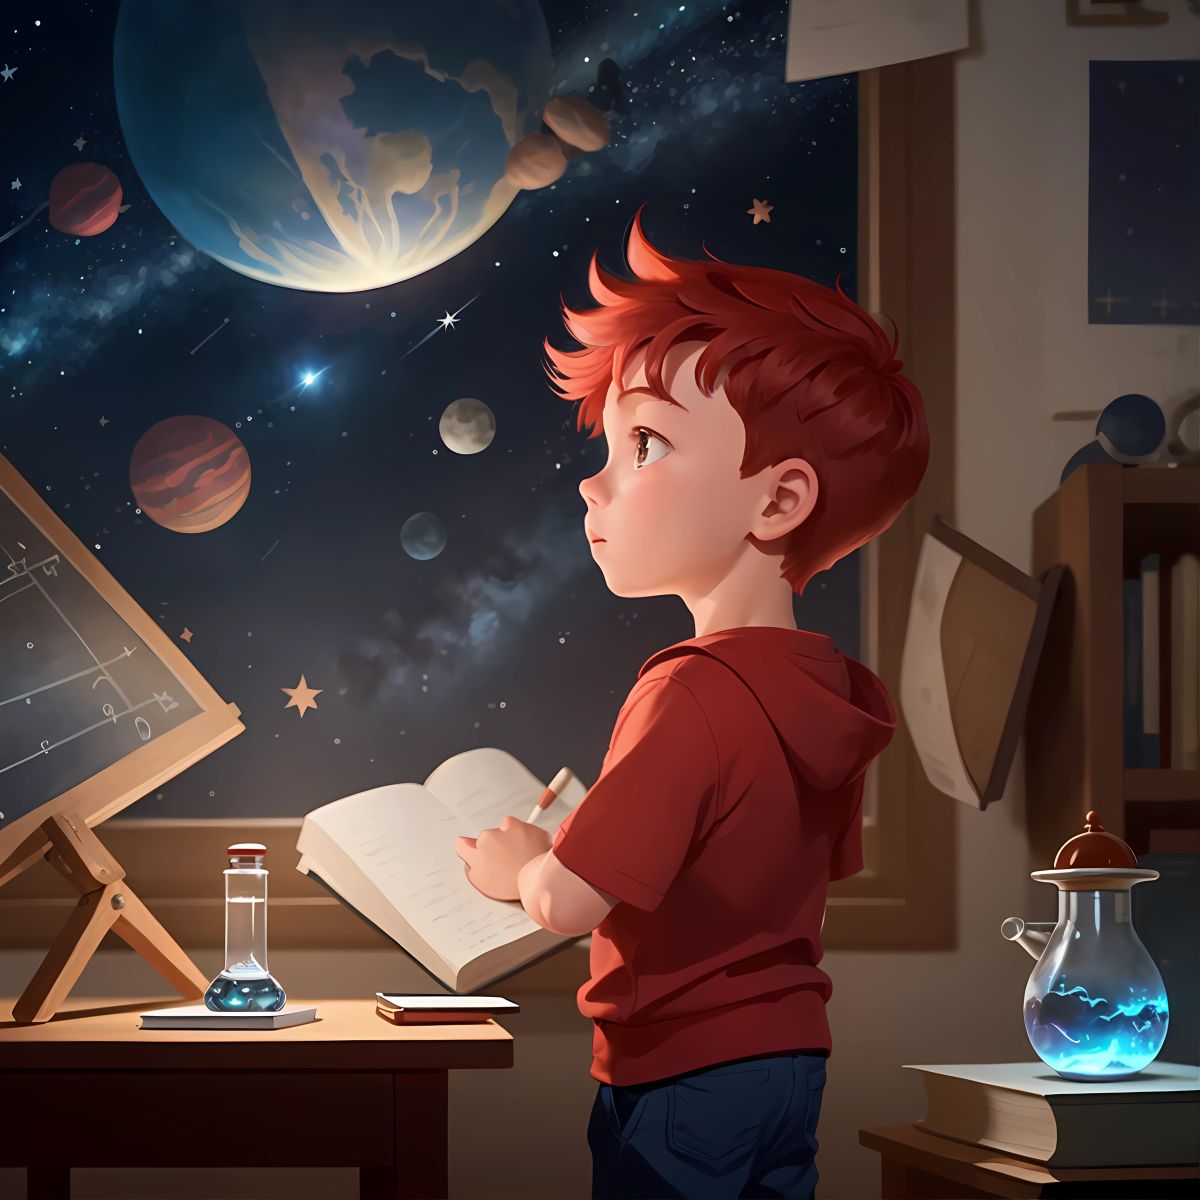 Adam pursuing his dreams with unyielding determination, devoting himself to his studies, immersing himself in the realms of science and mathematics, propelling him closer to the stars."